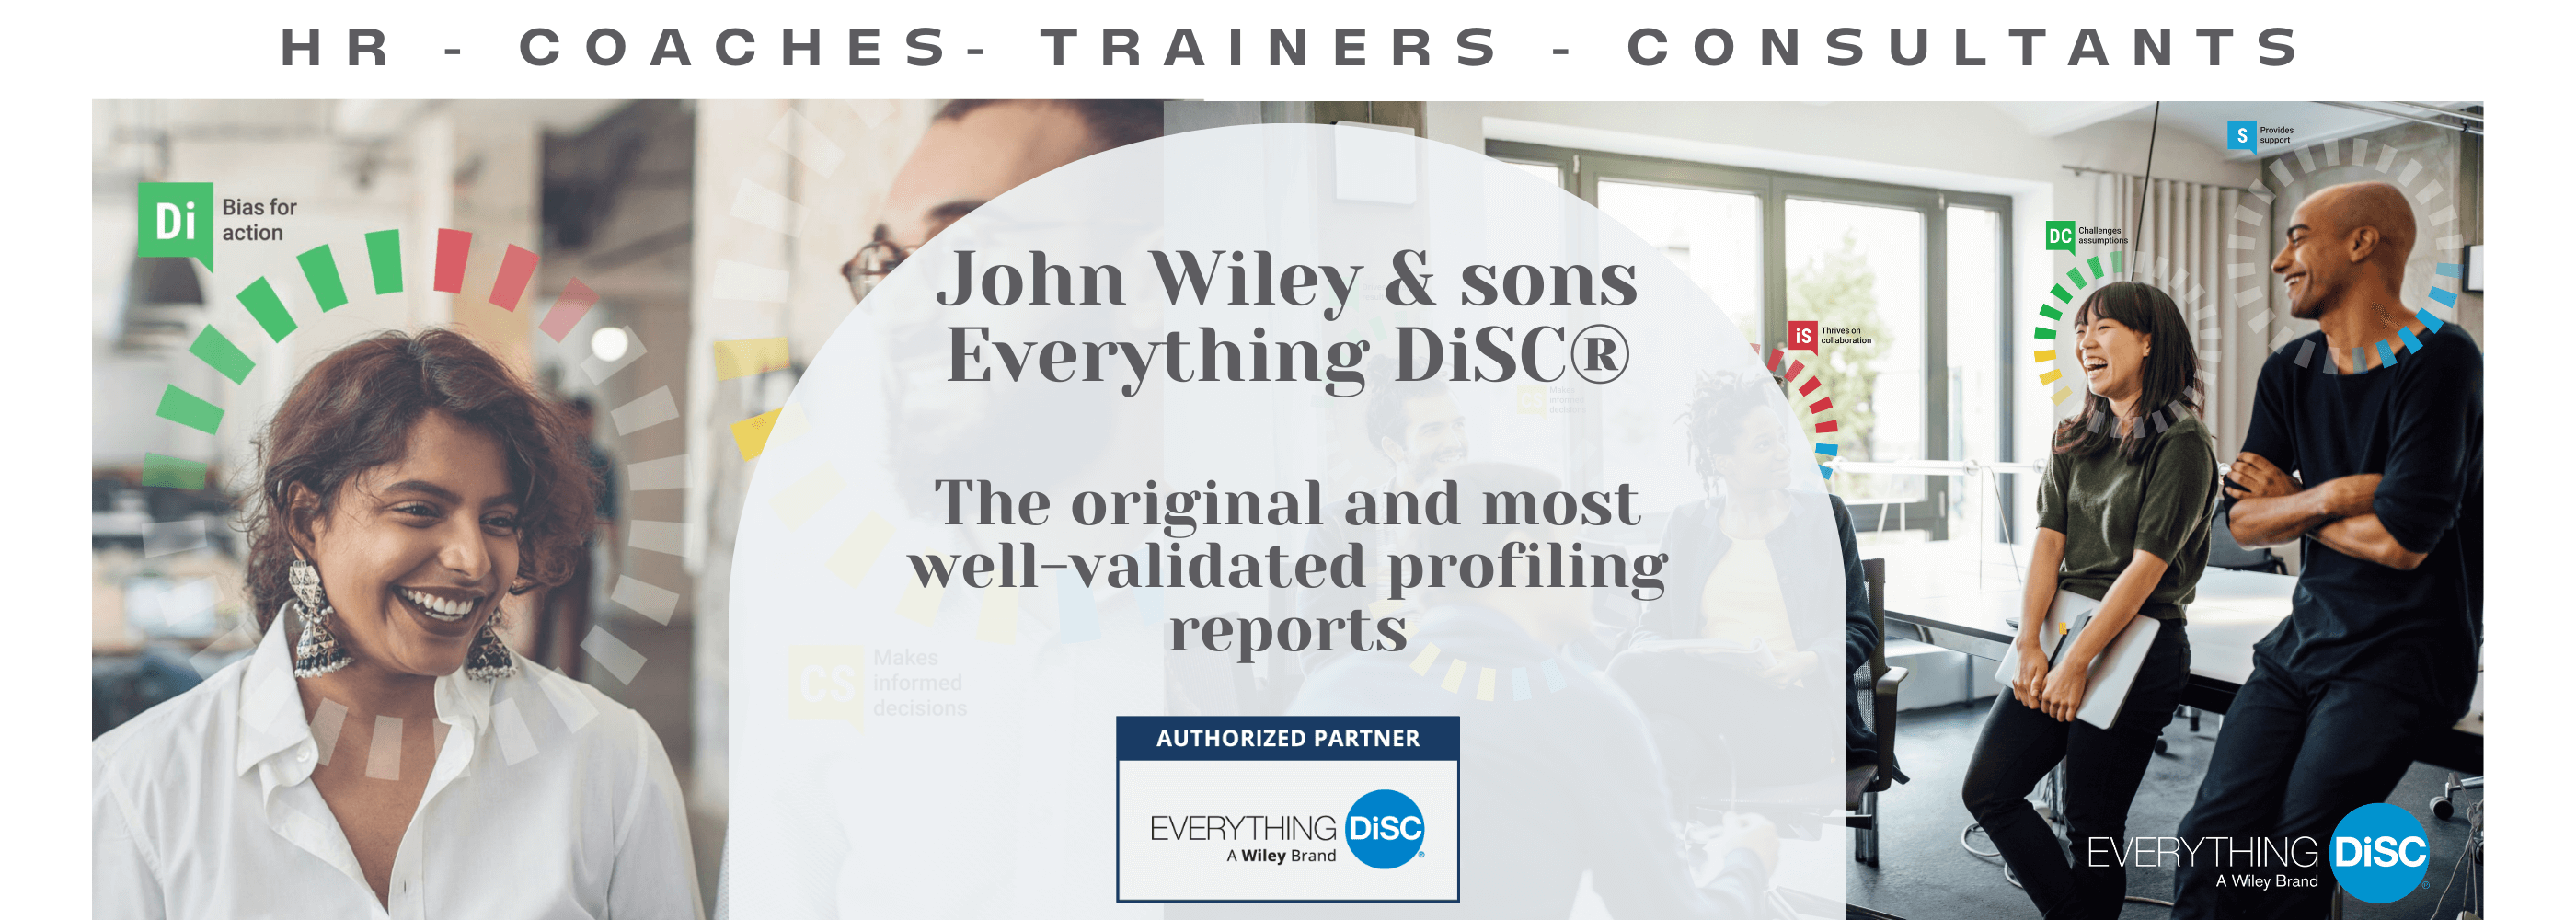 Coaches - consultants - trainers - HR UK Everything DiSC 